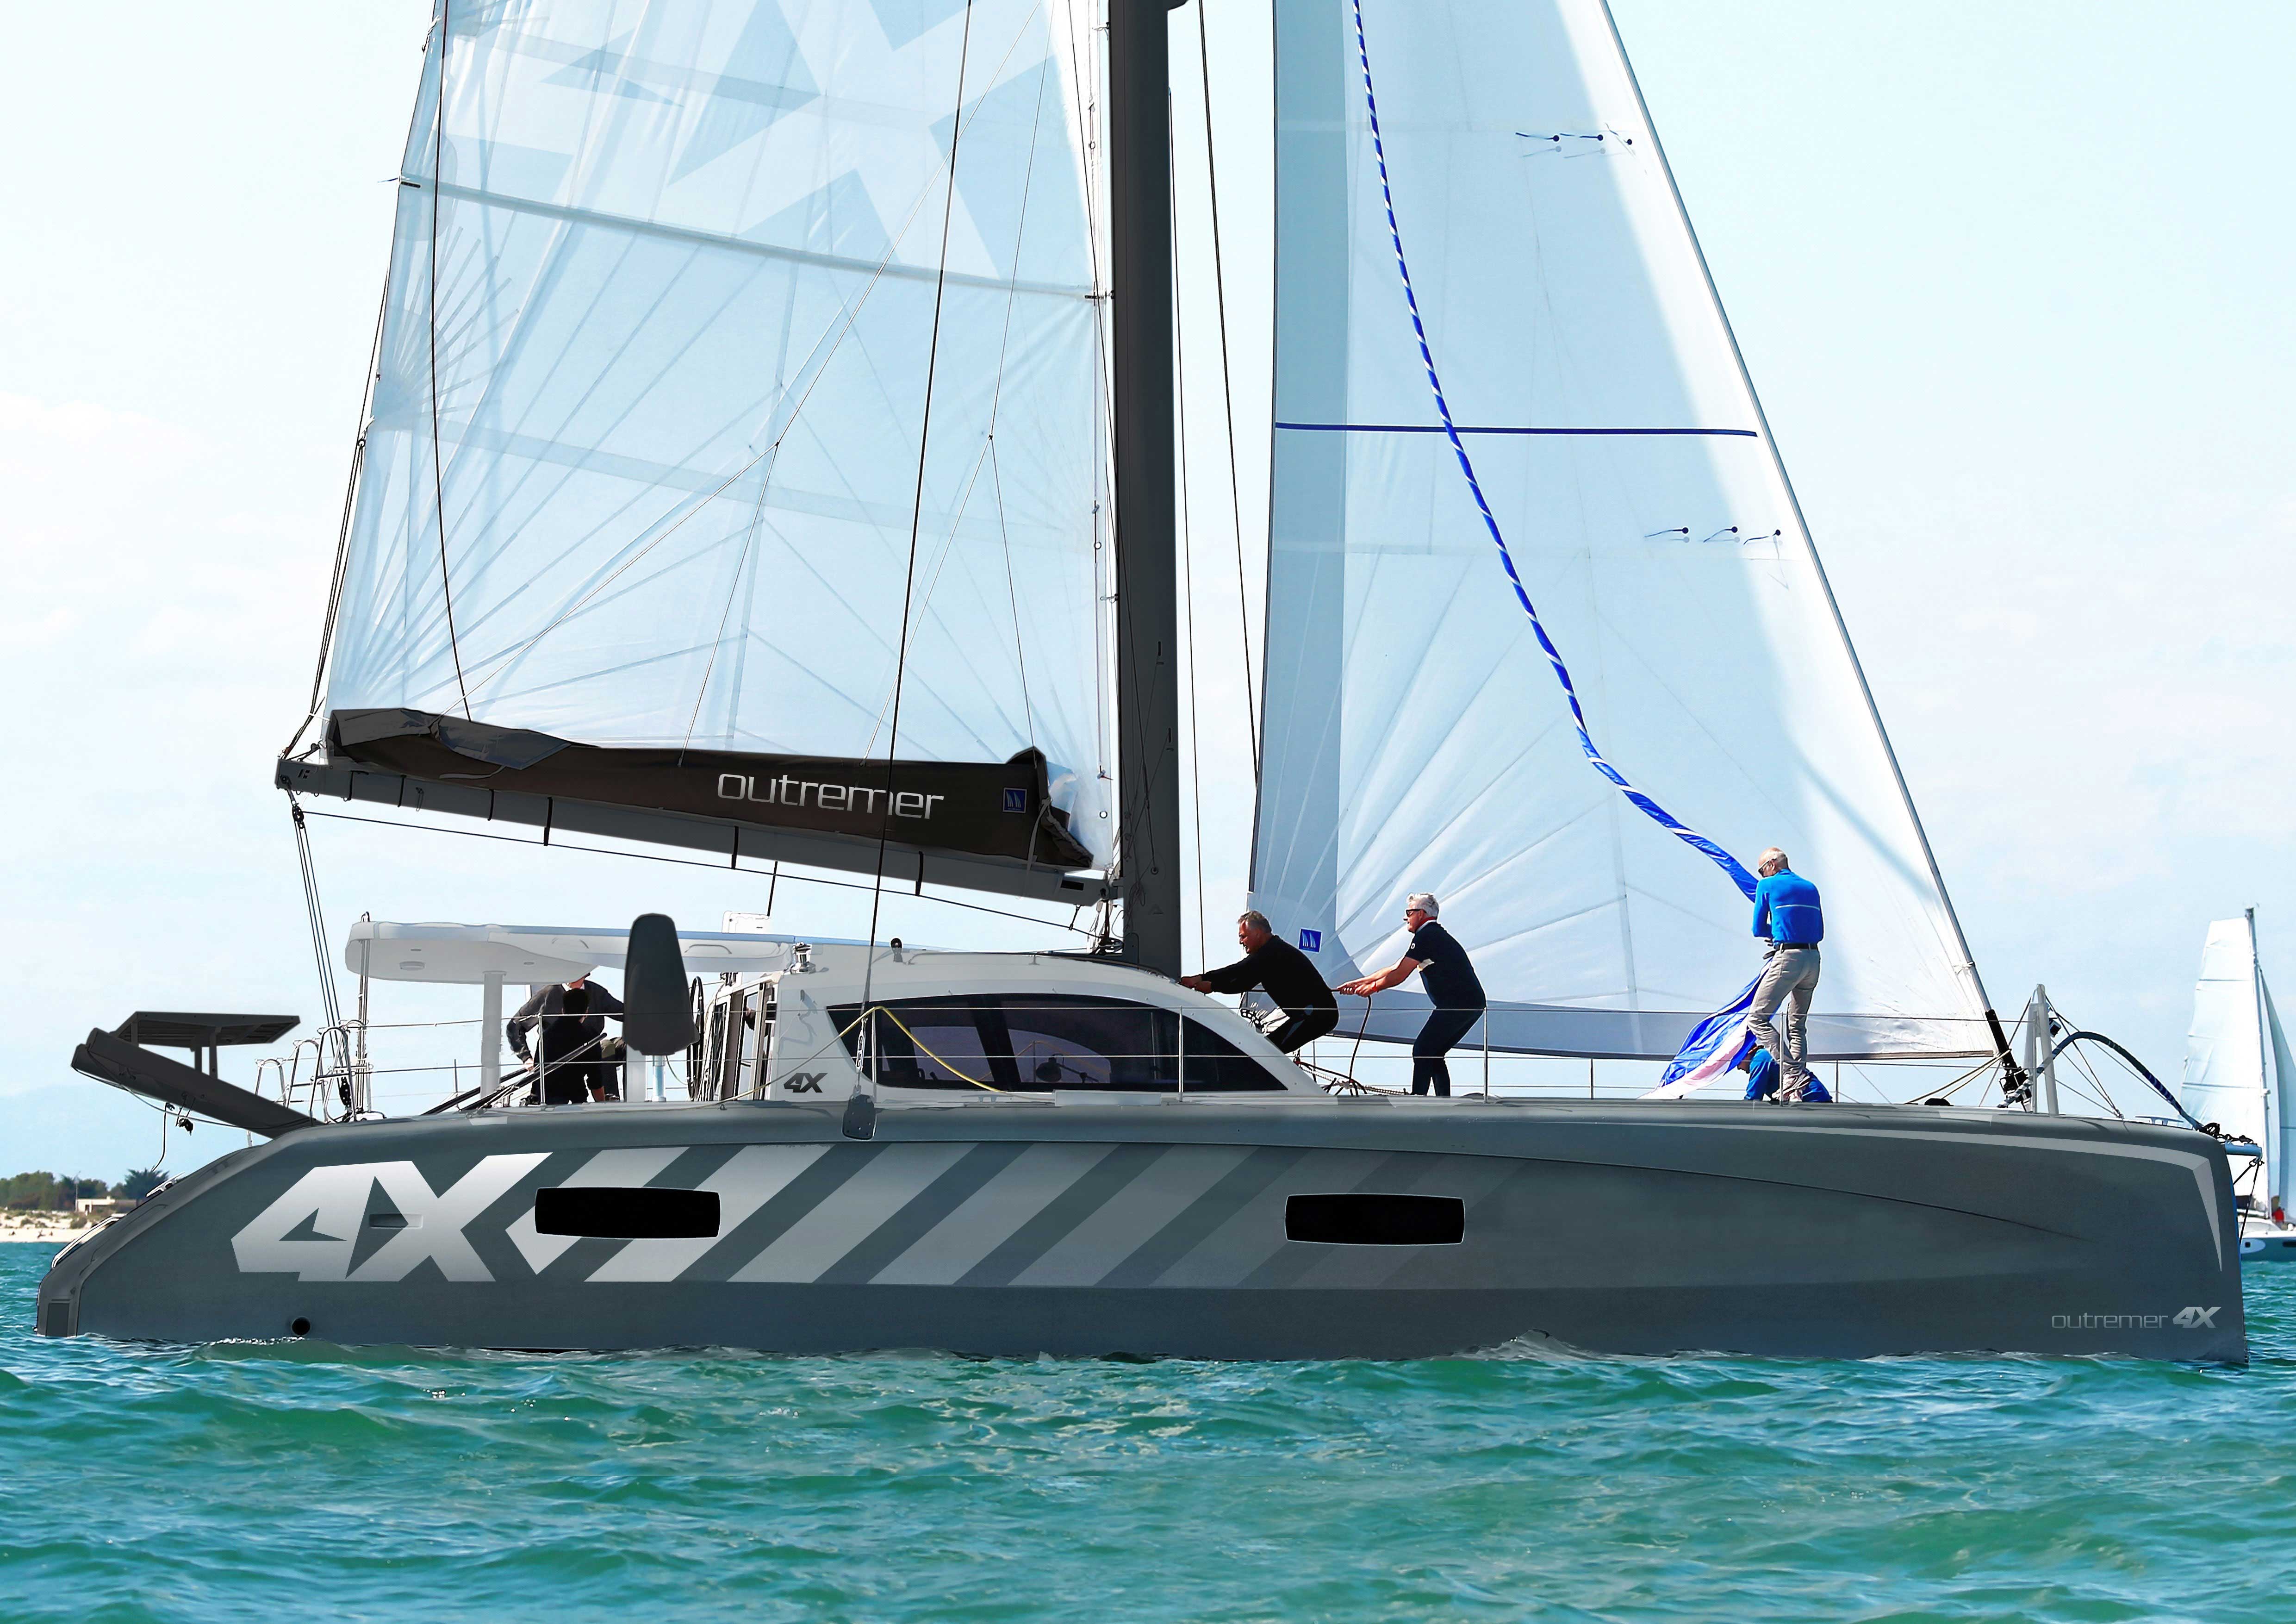 outremer-4x-exterior-gallery-3-2